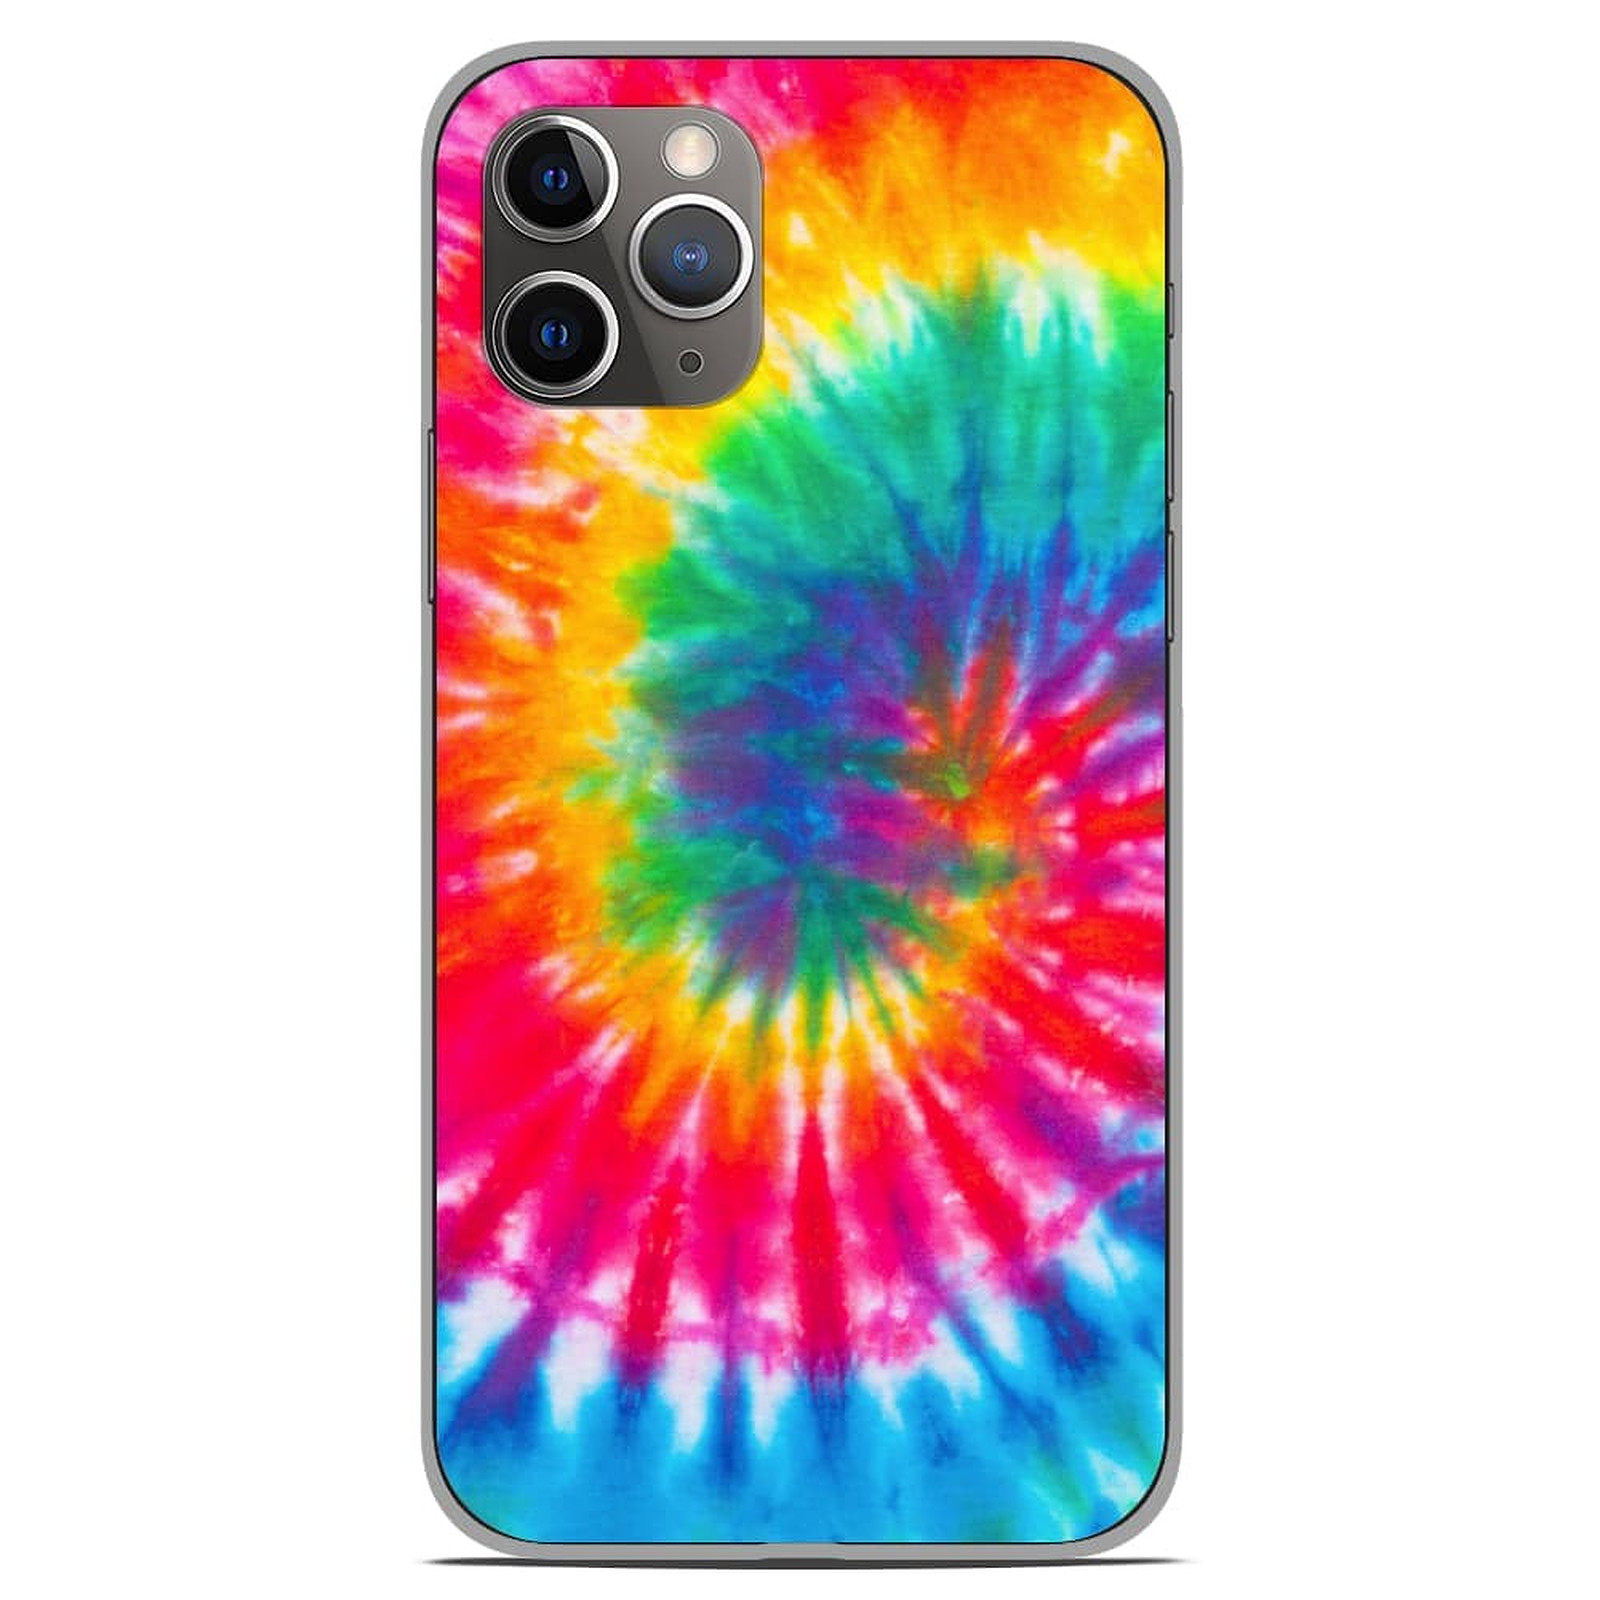 1001 Coques Coque silicone gel Apple iPhone 11 Pro motif Tie Dye Spirale - Coque telephone 1001Coques